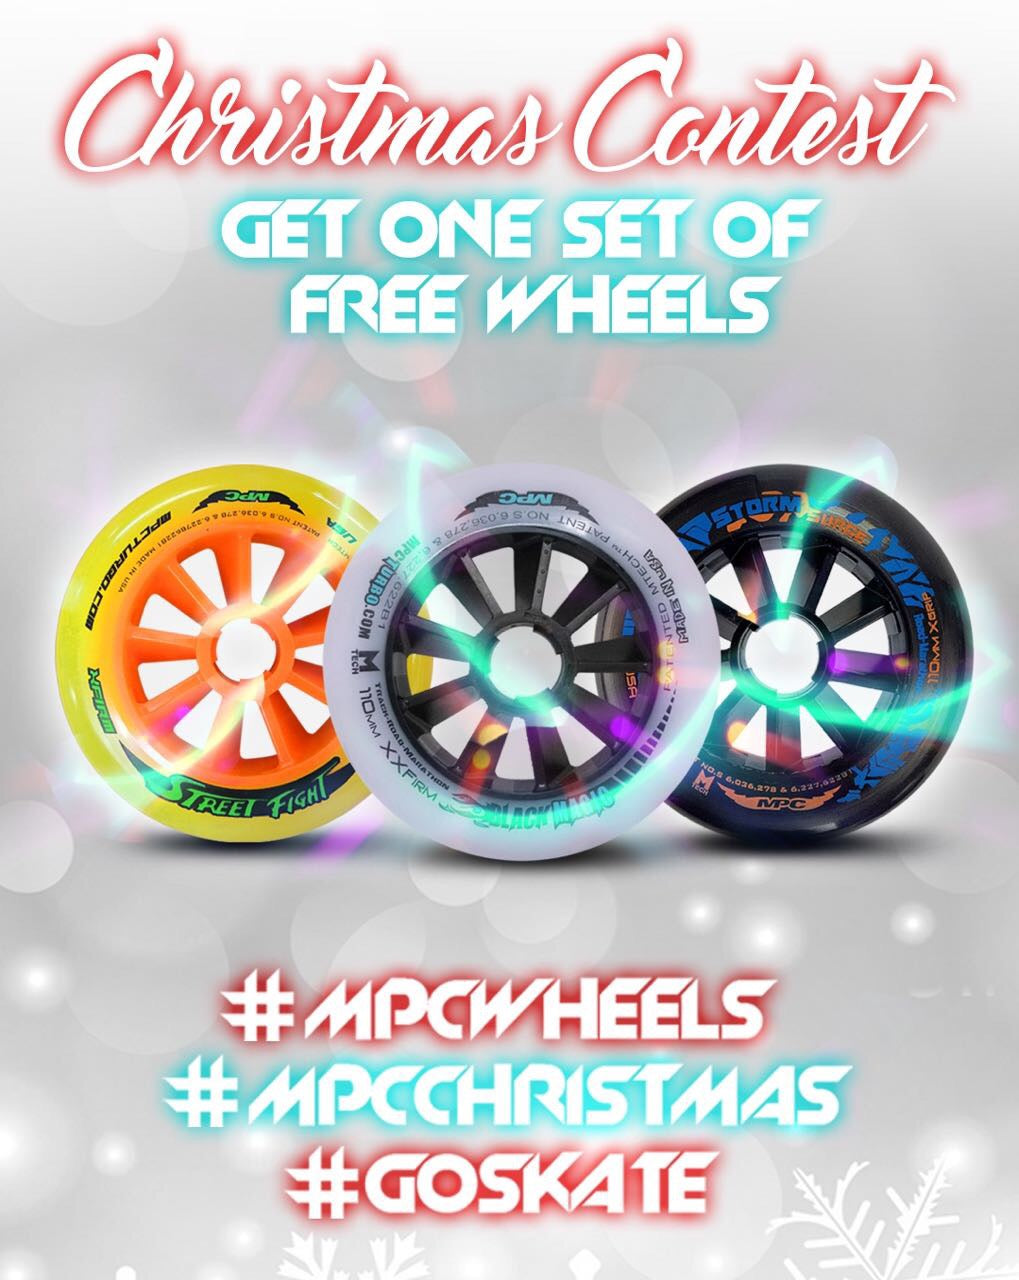 MPC Wheels Christmas contest is here!